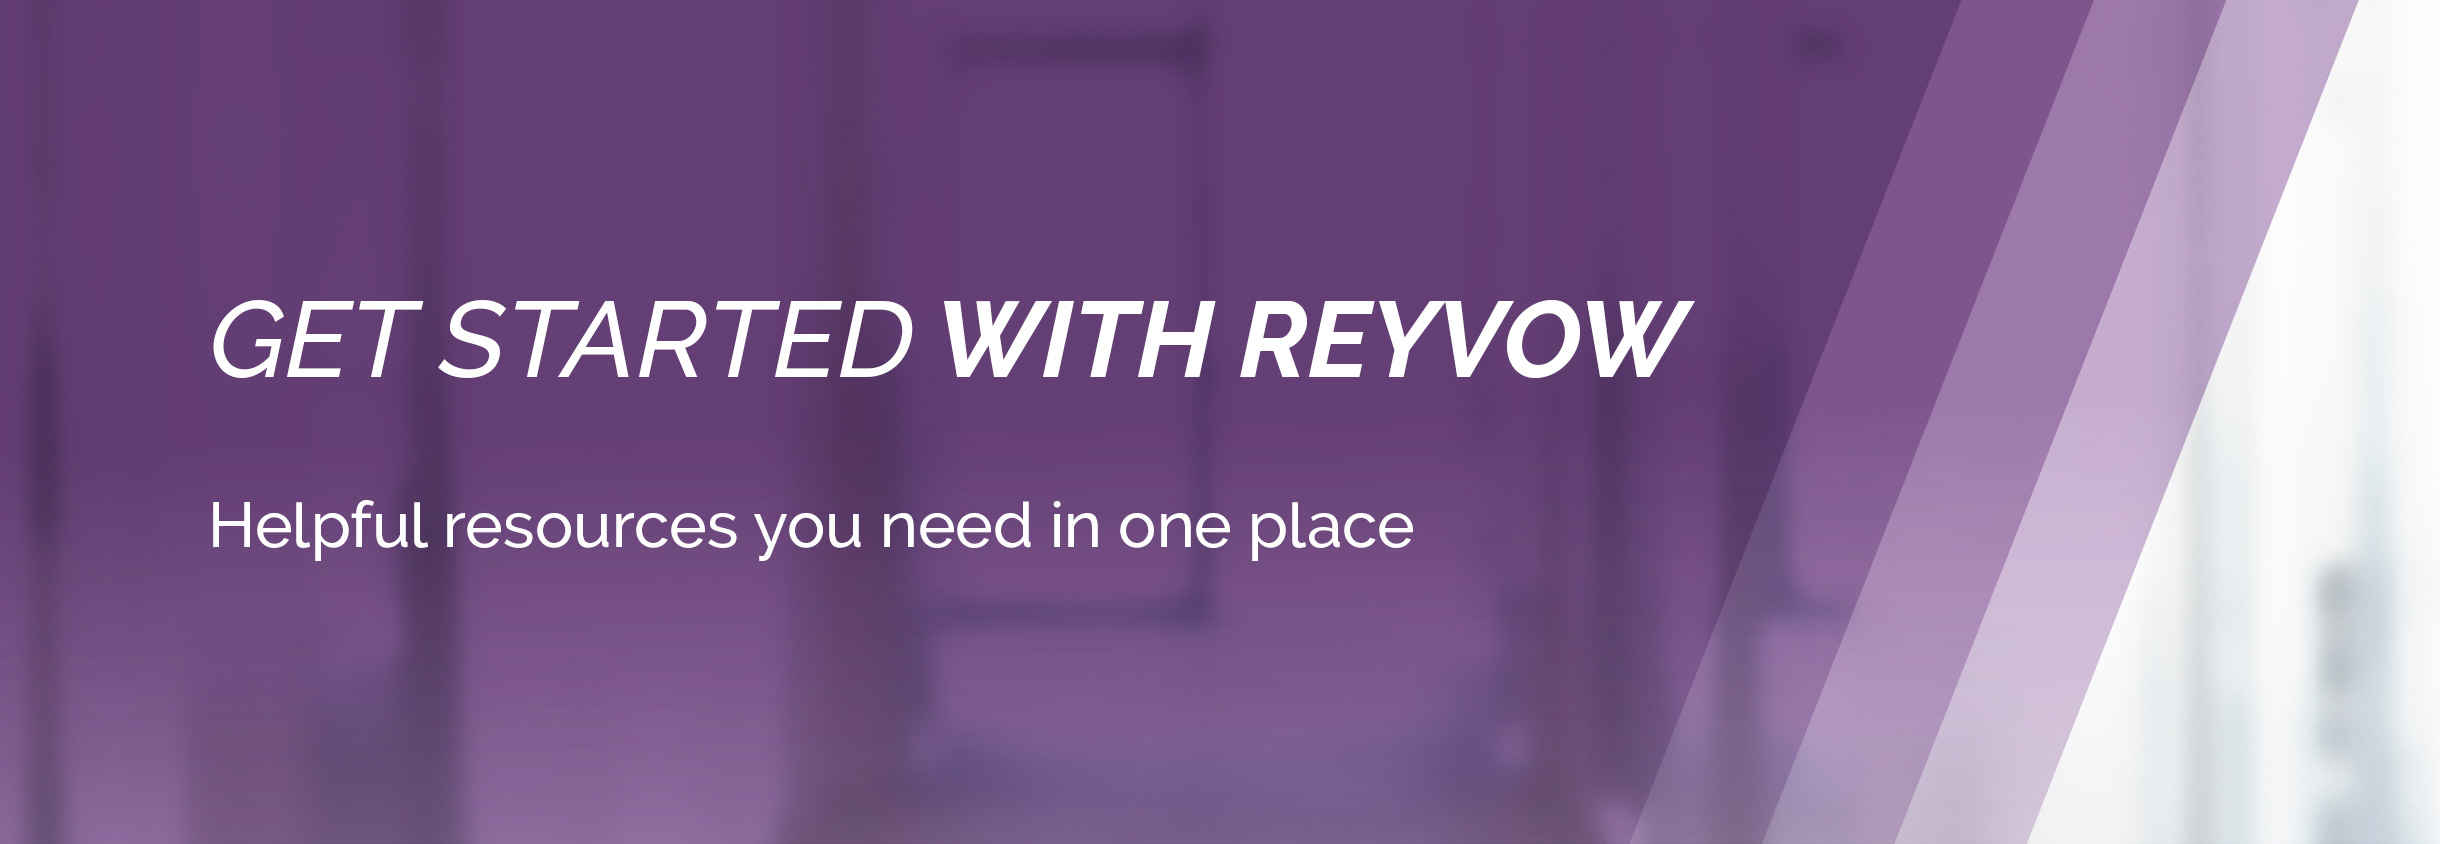 Get started with REYVOW. Helpful resources you need in one place.